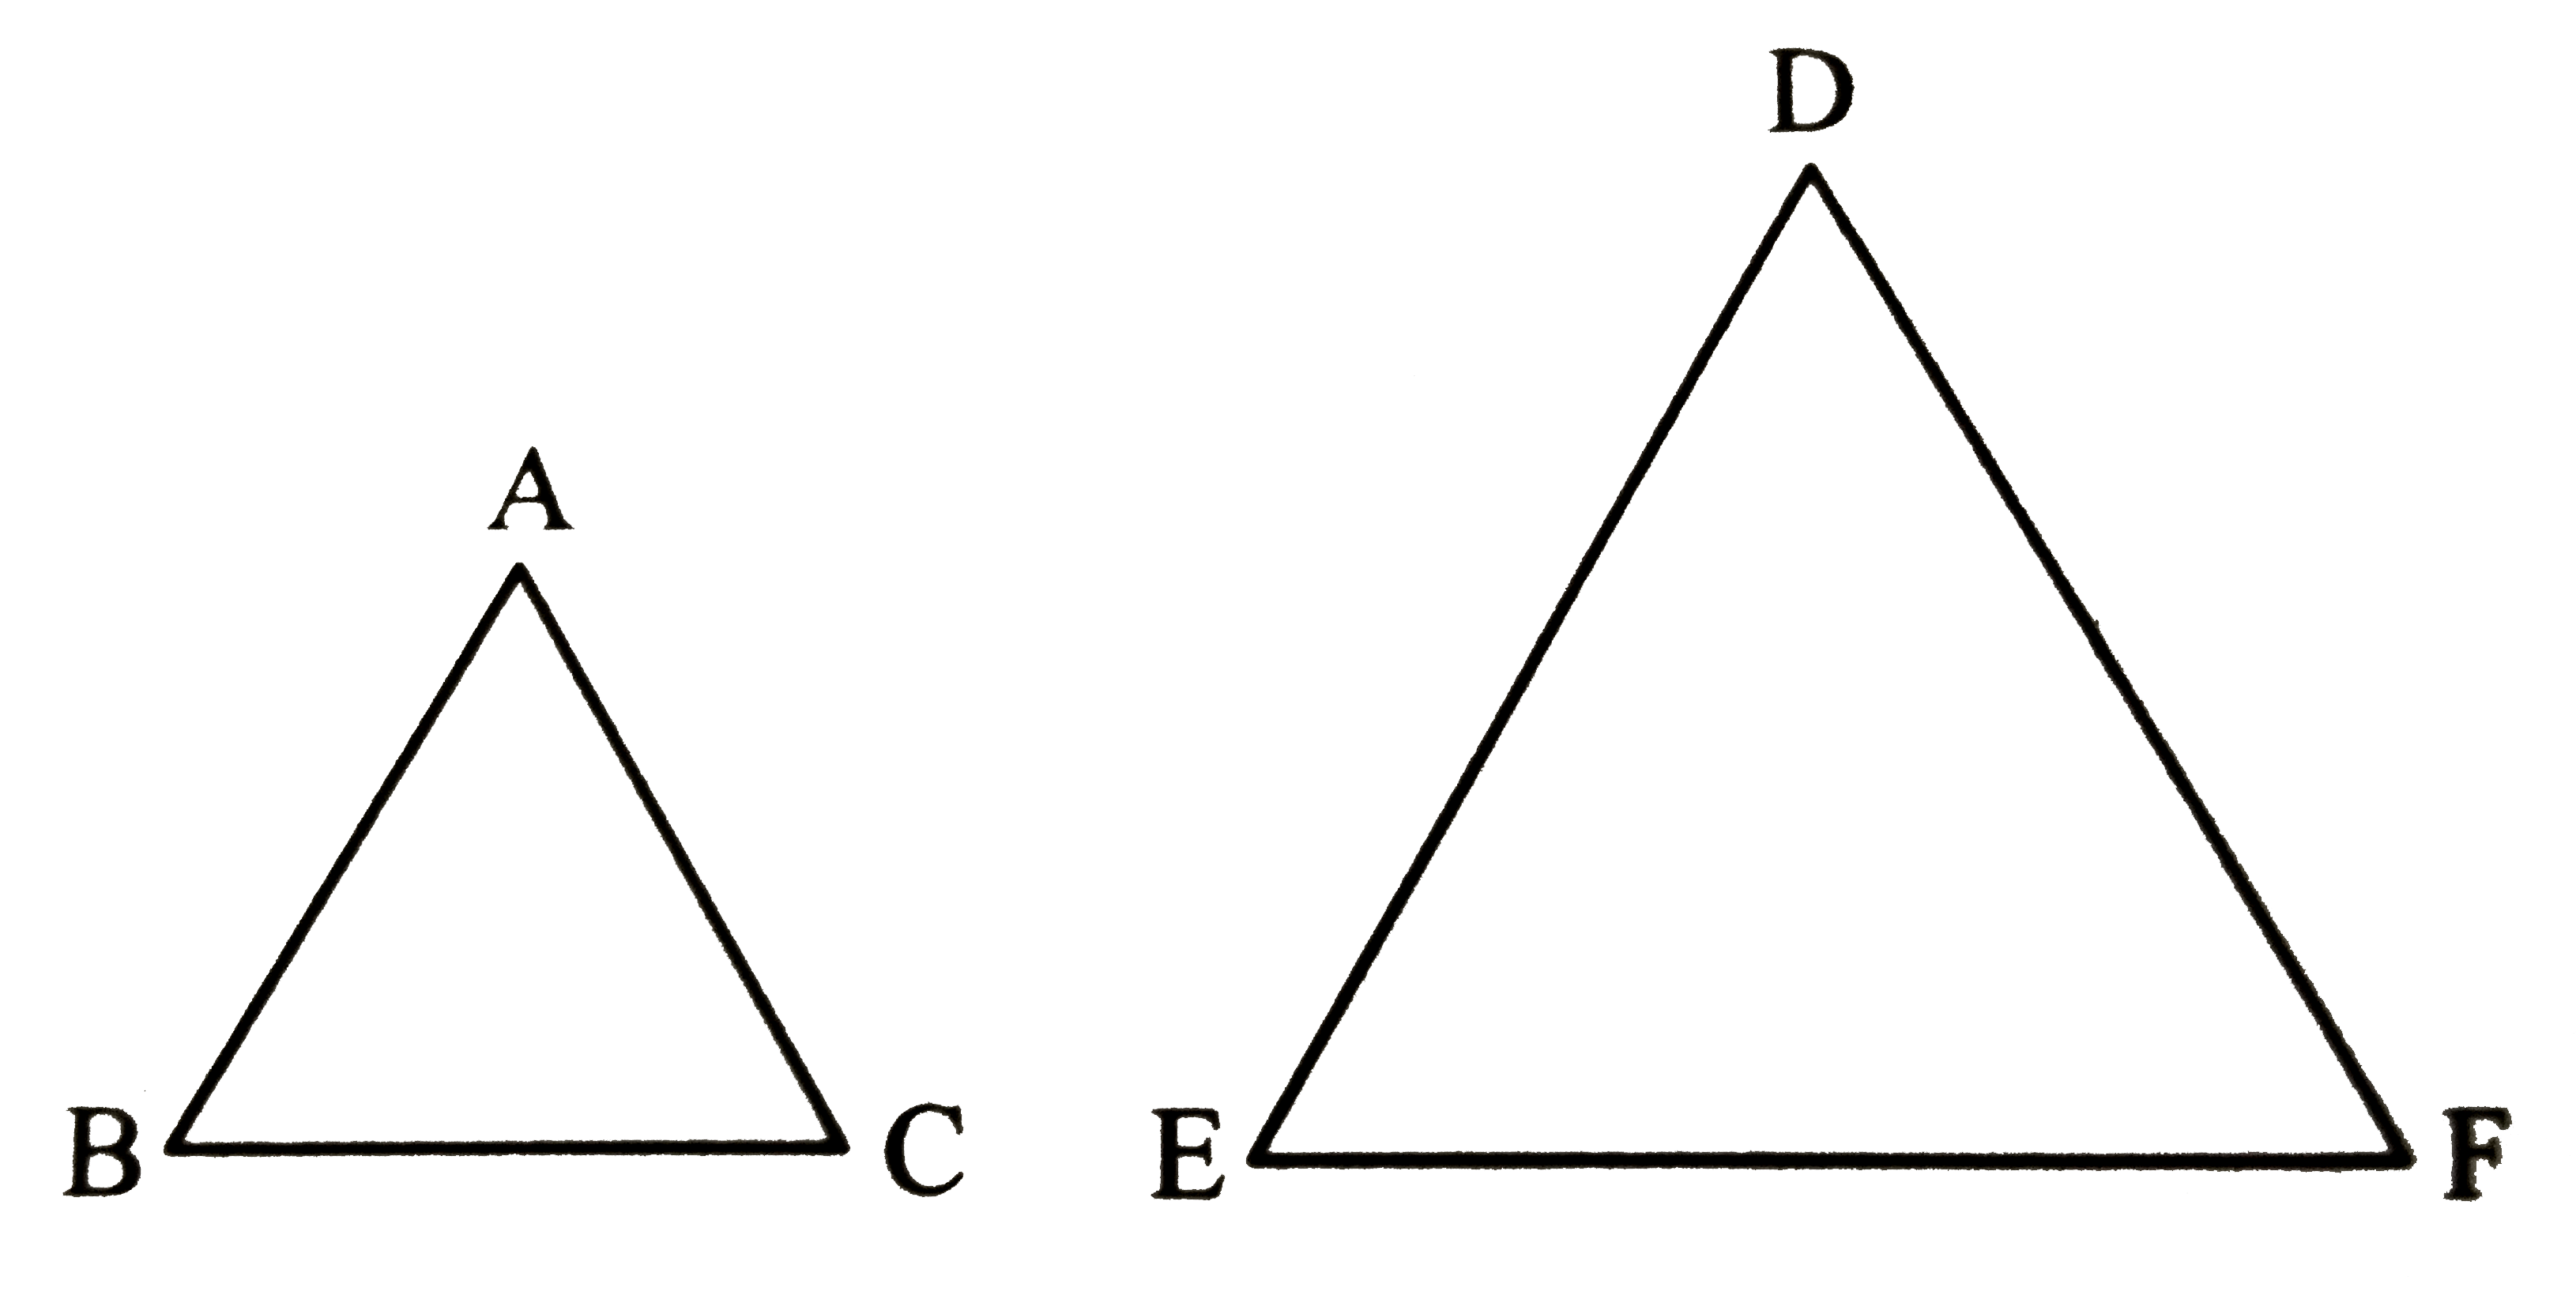 DeltaABC and DeltaDEF are equlateral triangles. A(DeltaABC) : A(DeltaDEF) =  1 : 2. If AB = 4 , then what is length of DE?